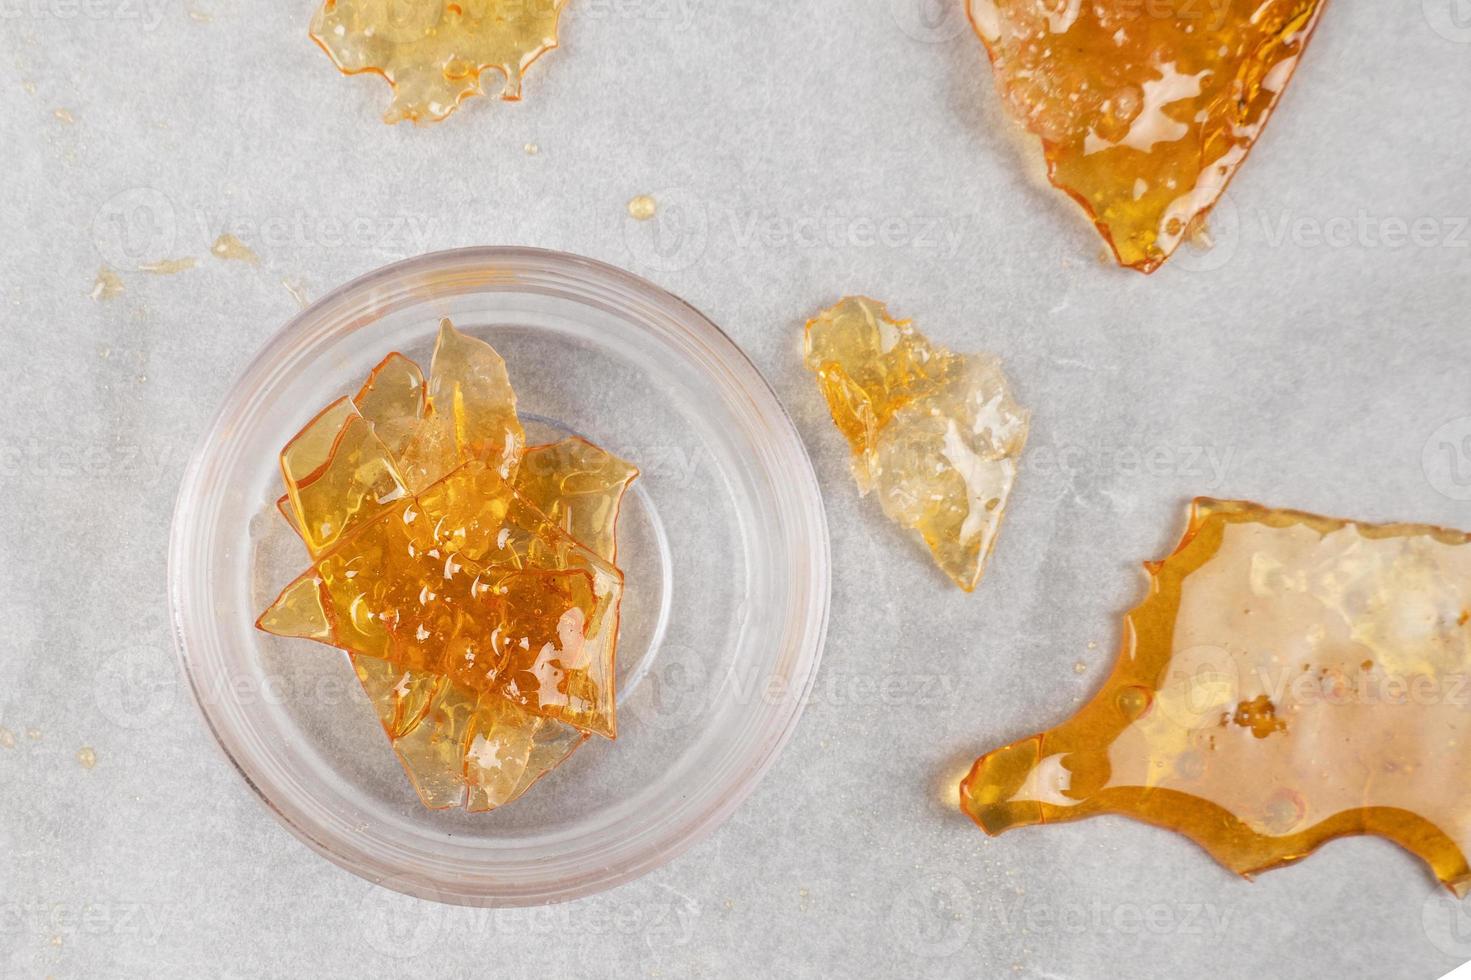 box with golden cannabis wax pieces, shatter resin photo